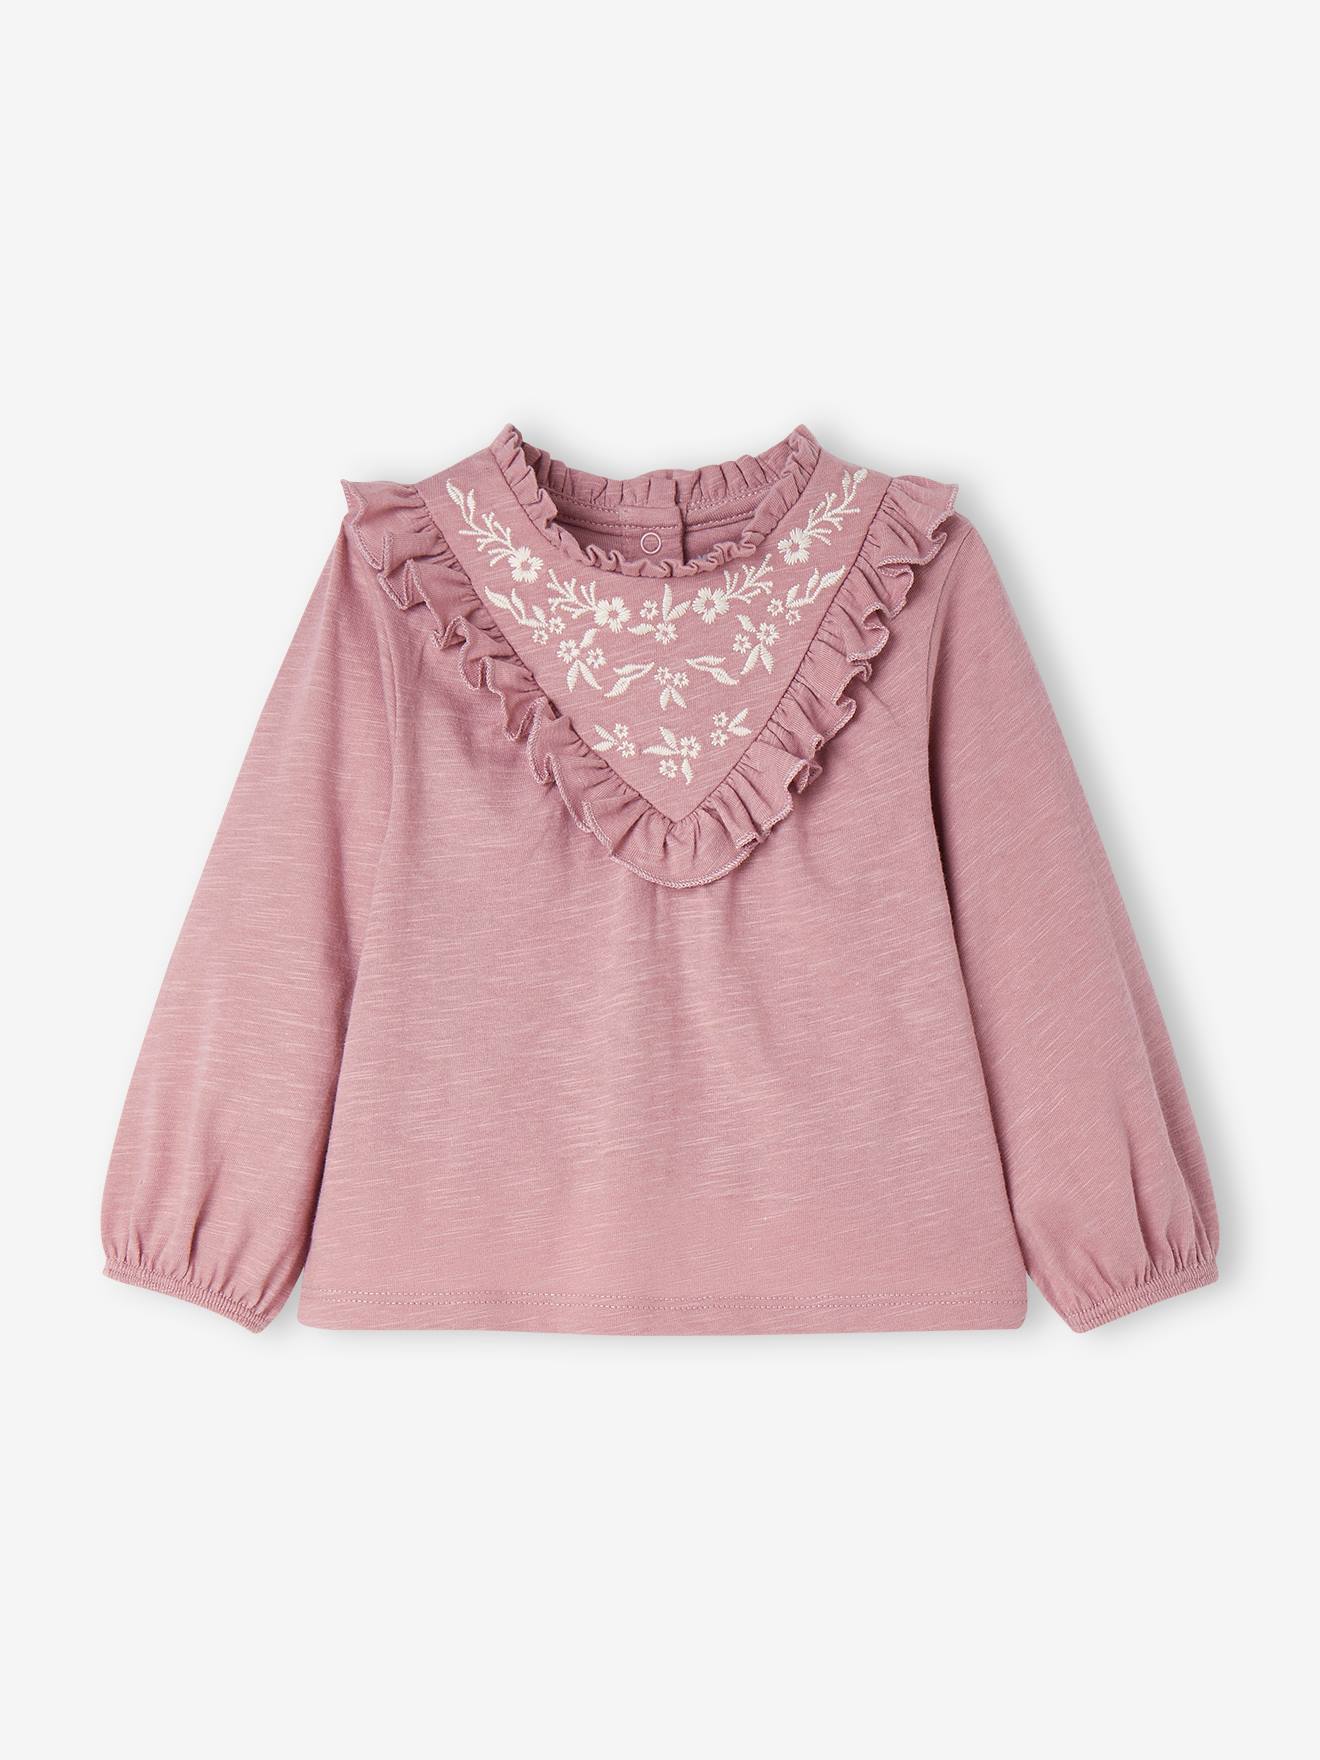 Embroidered Top with Ruffle for Babies lilac